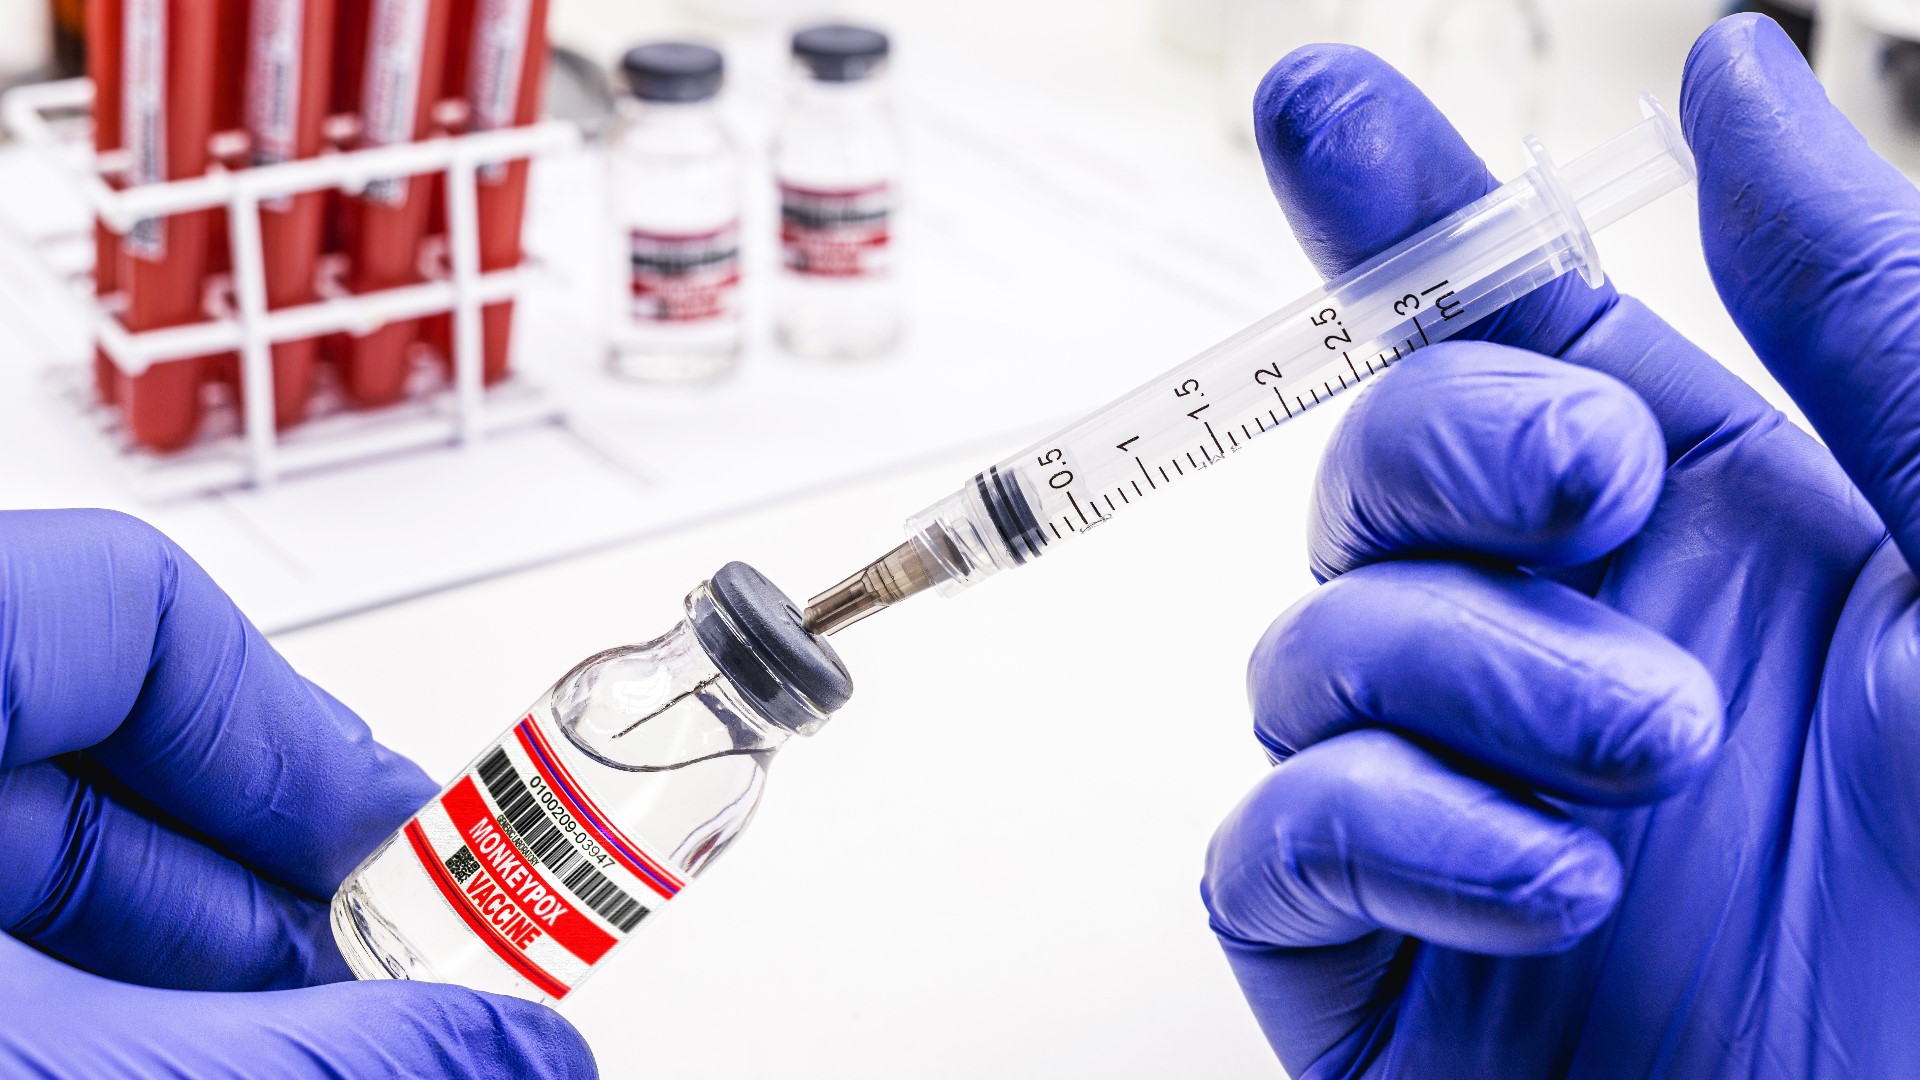 The updated bivalent version of the Pfizer and Moderna vaccine boosters are formulated to protect against COVID-19 and the newer Omicron variants.